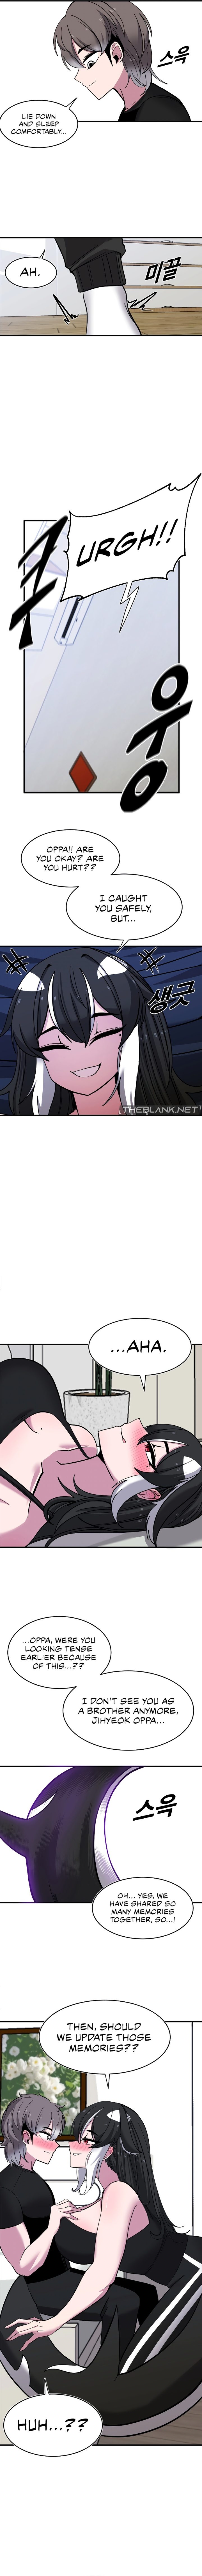 Double Life of Gukbap - Chapter 14 Page 7